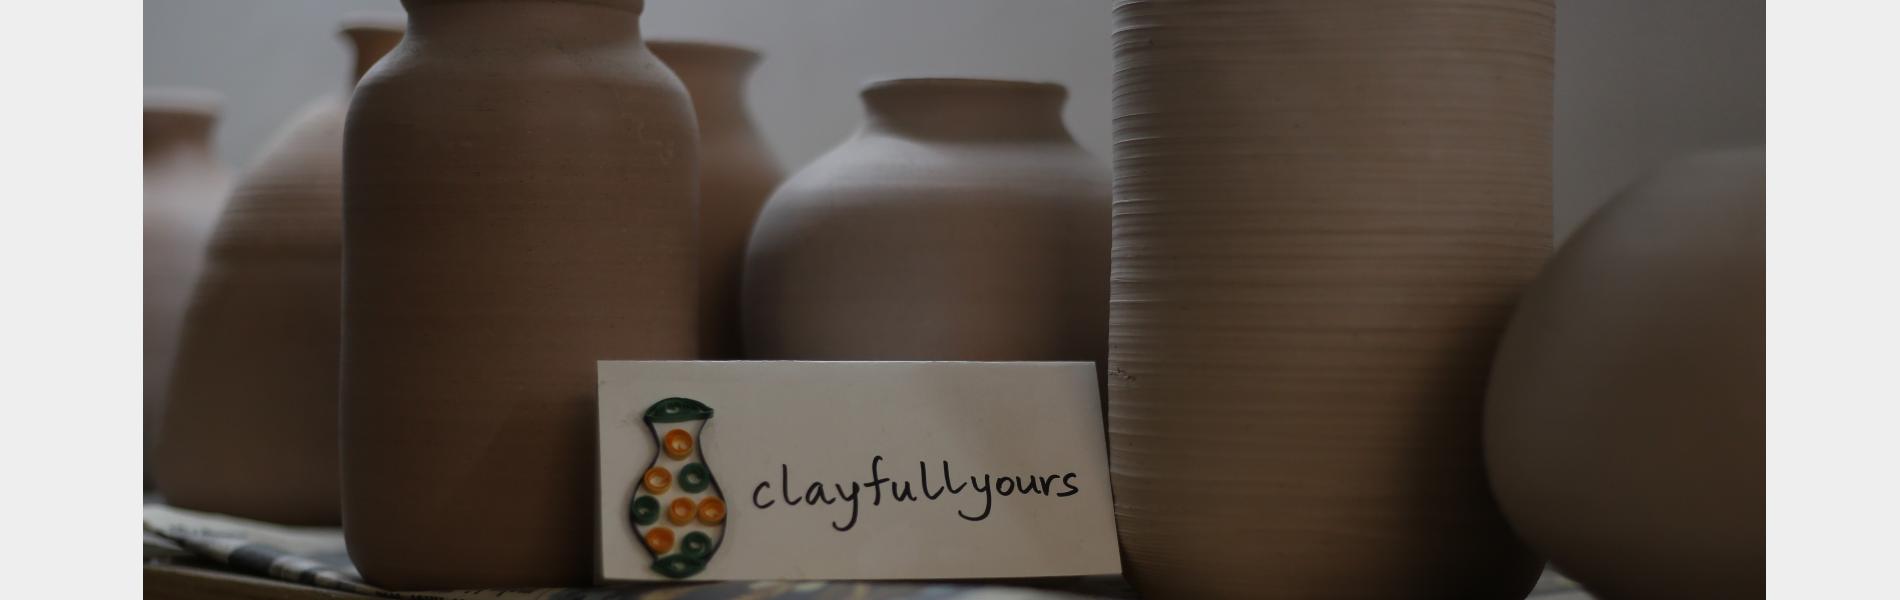 clayfullyours